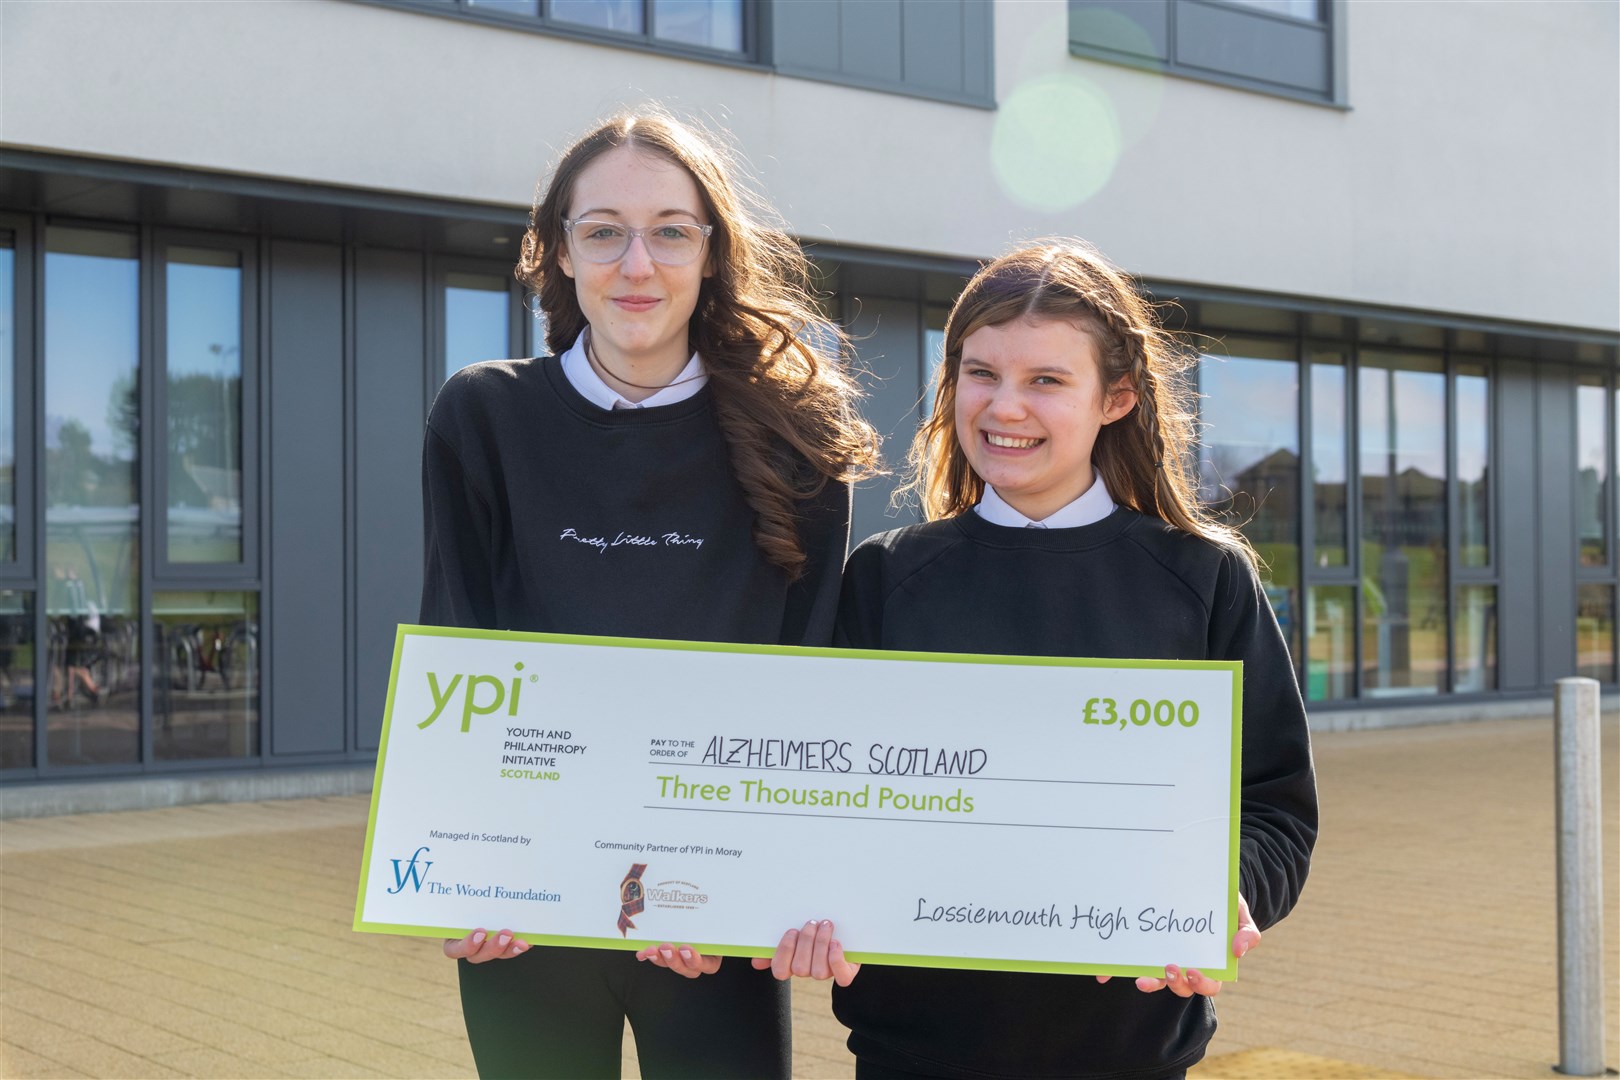 Caitlyn Duncan and Kali Mitchell have won £3,000 for Alzheimer's Scotland via the Youth and Philanthropy Initiative (YPI). Picture: Beth Taylor